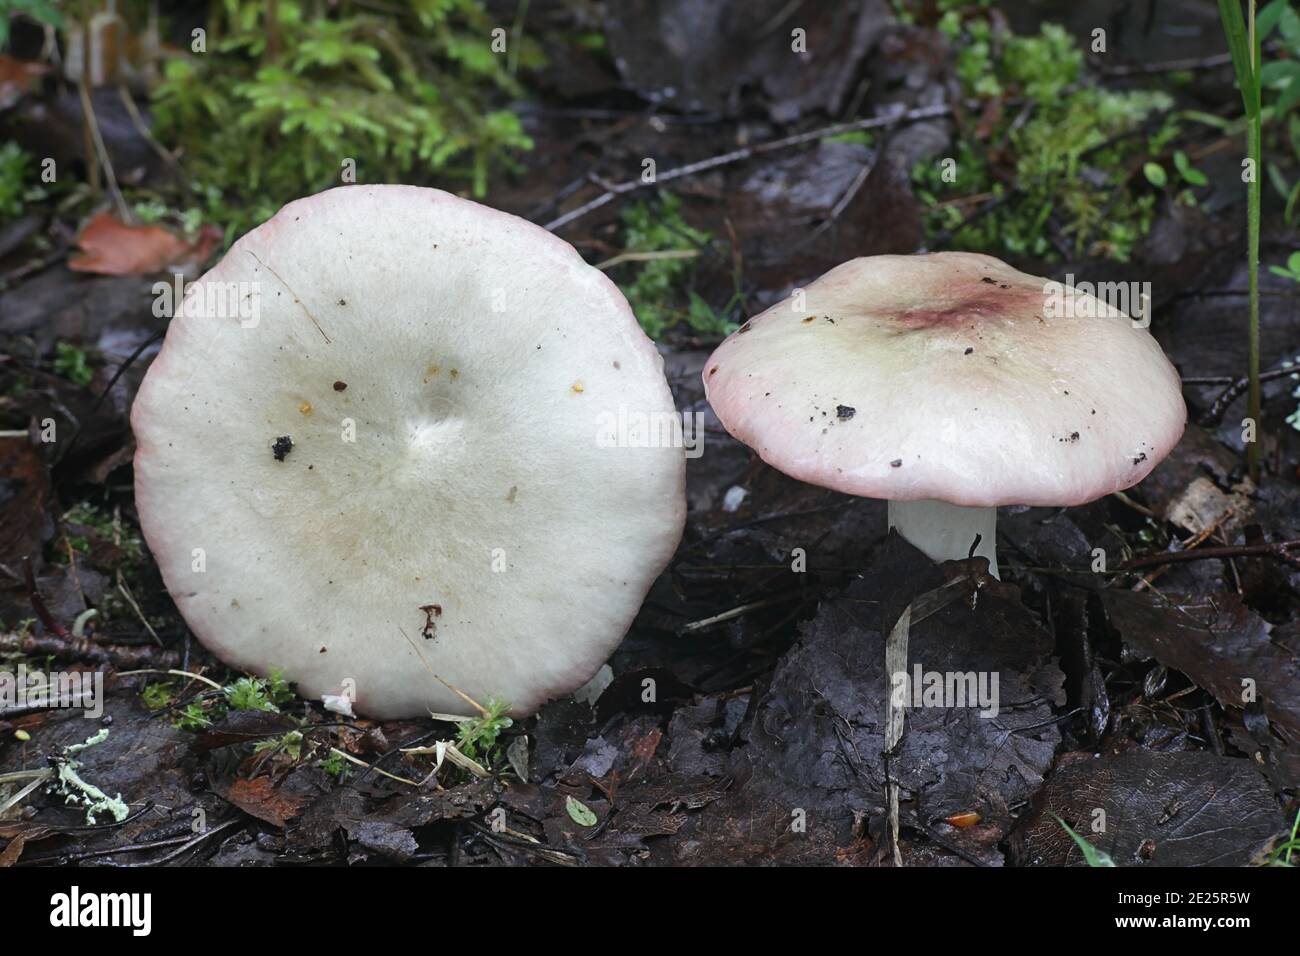 Russula depallens, known as bleached brittlegill, wild mushrooms from Finland Stock Photo